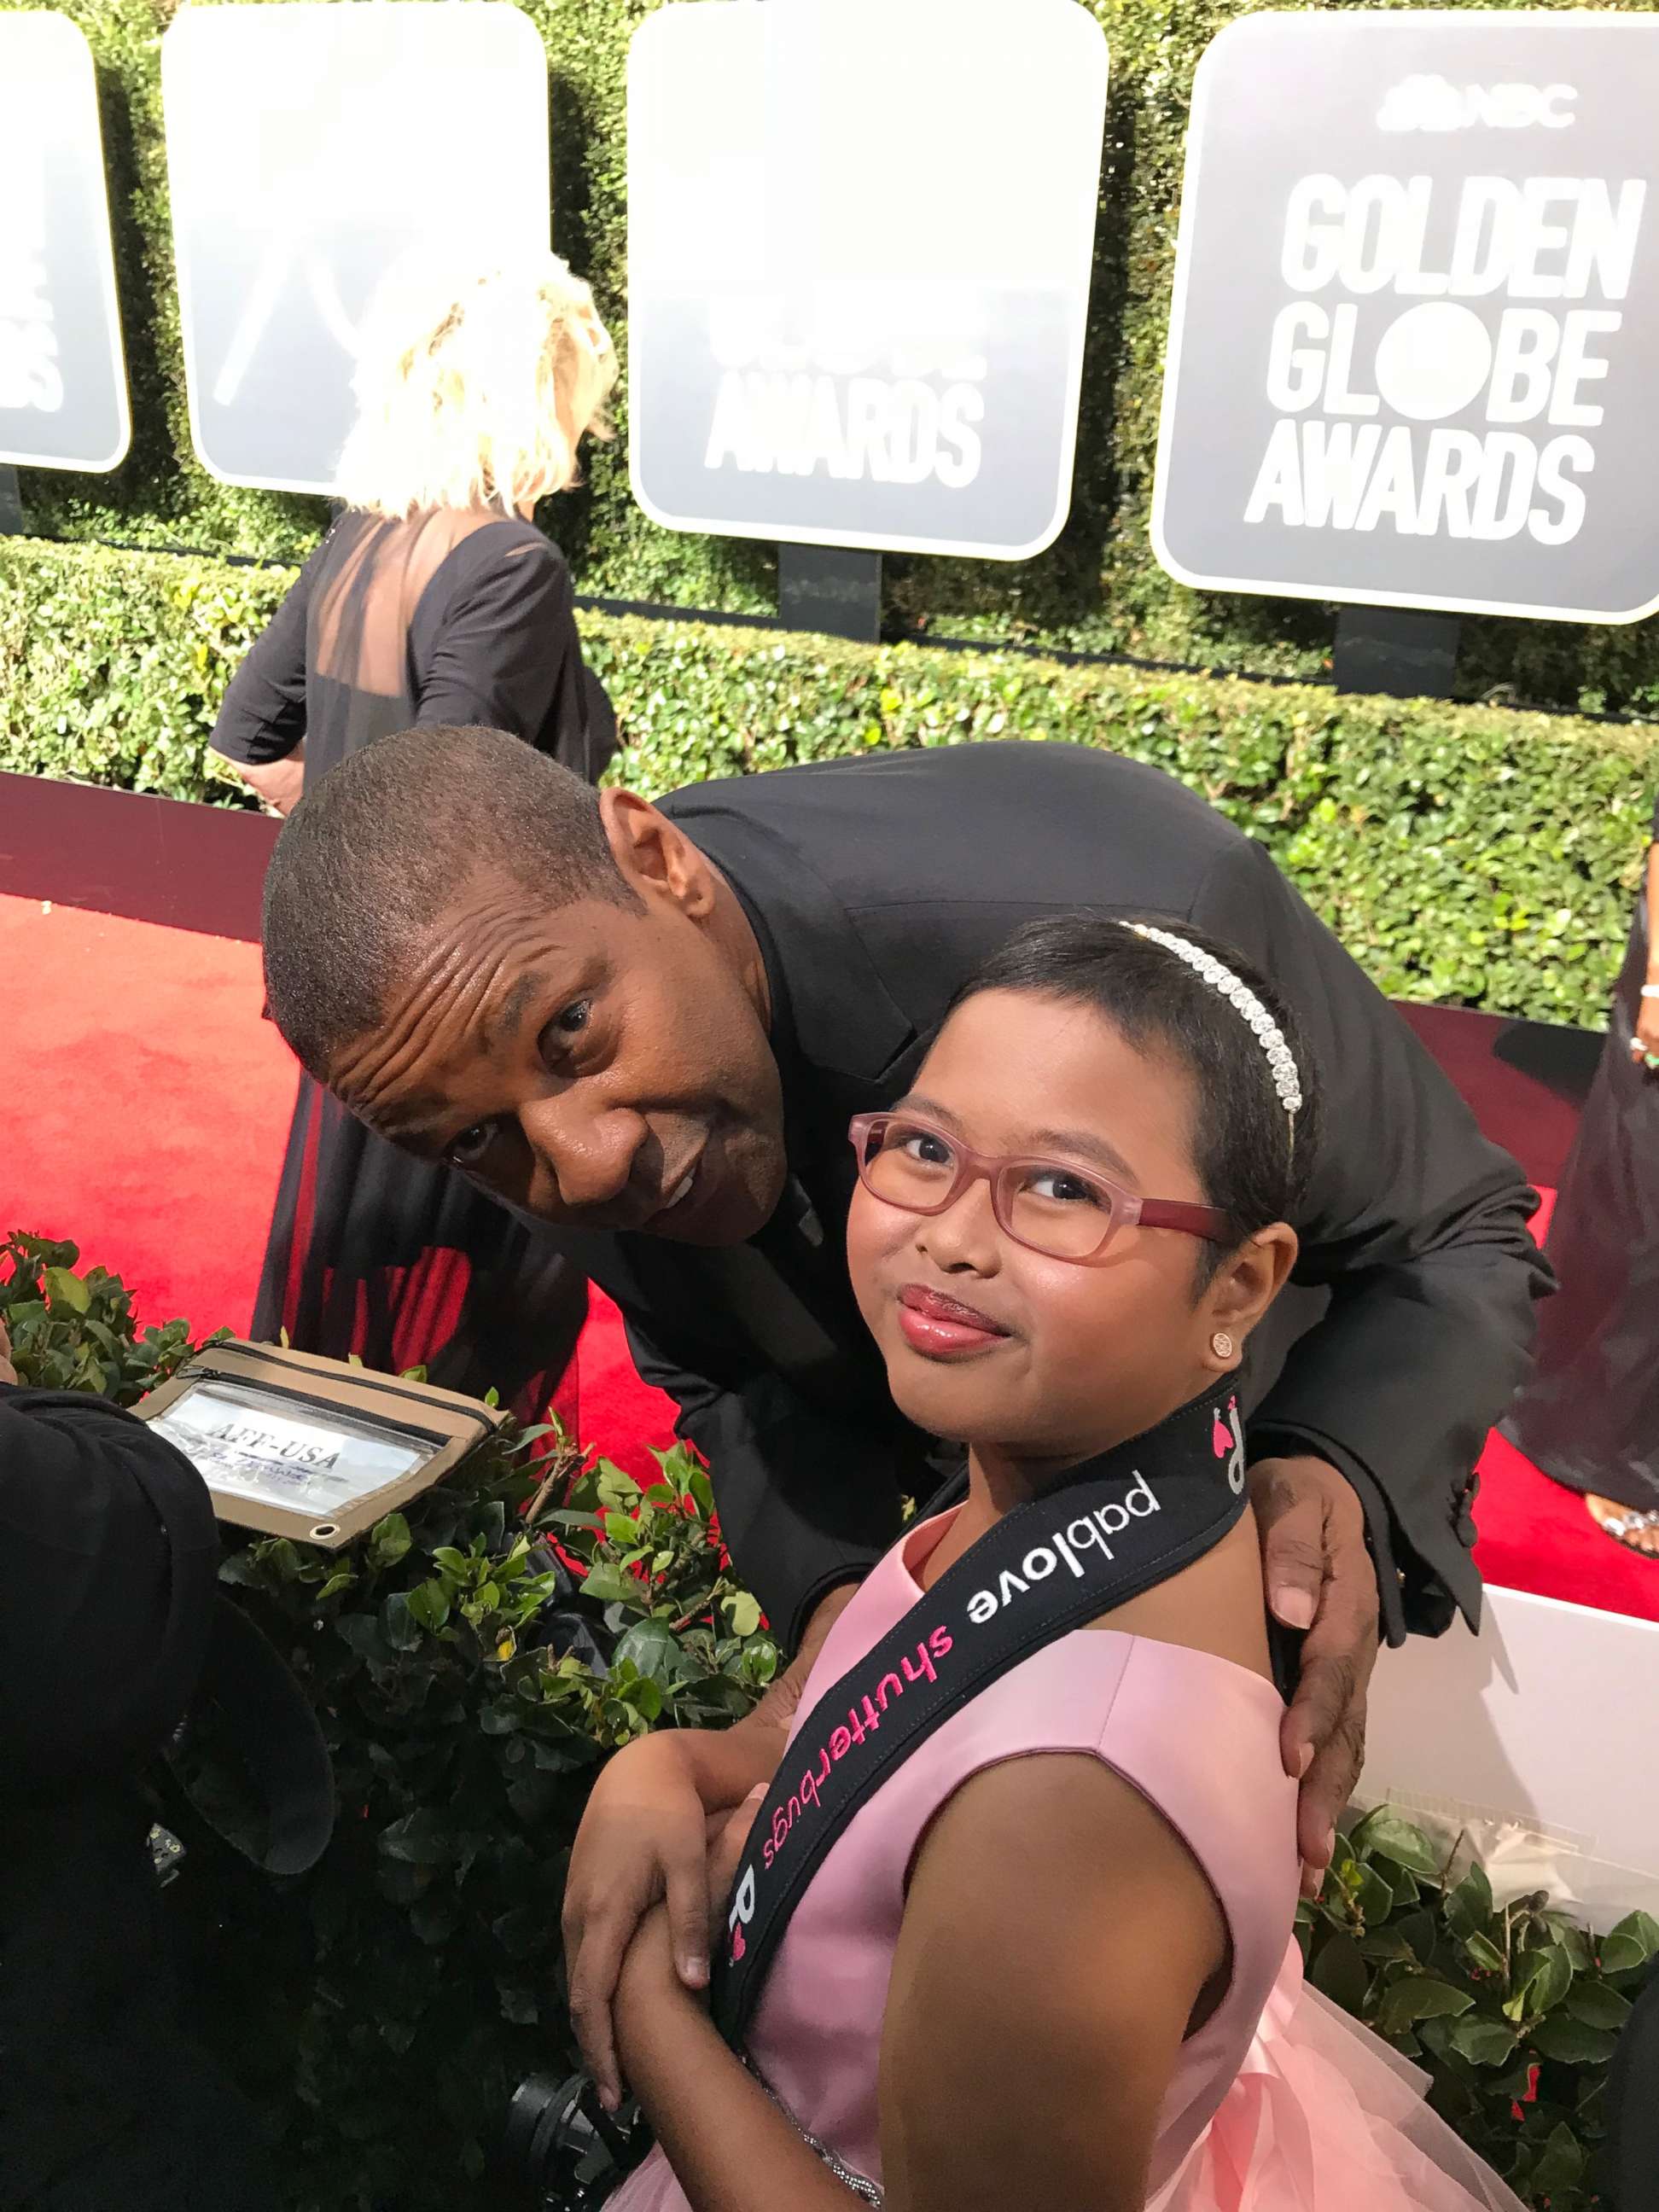 PHOTO: Francine Gascon, 10, poses with Denzel Washington as she takes photos of stars on the Golden Globes red carpet.